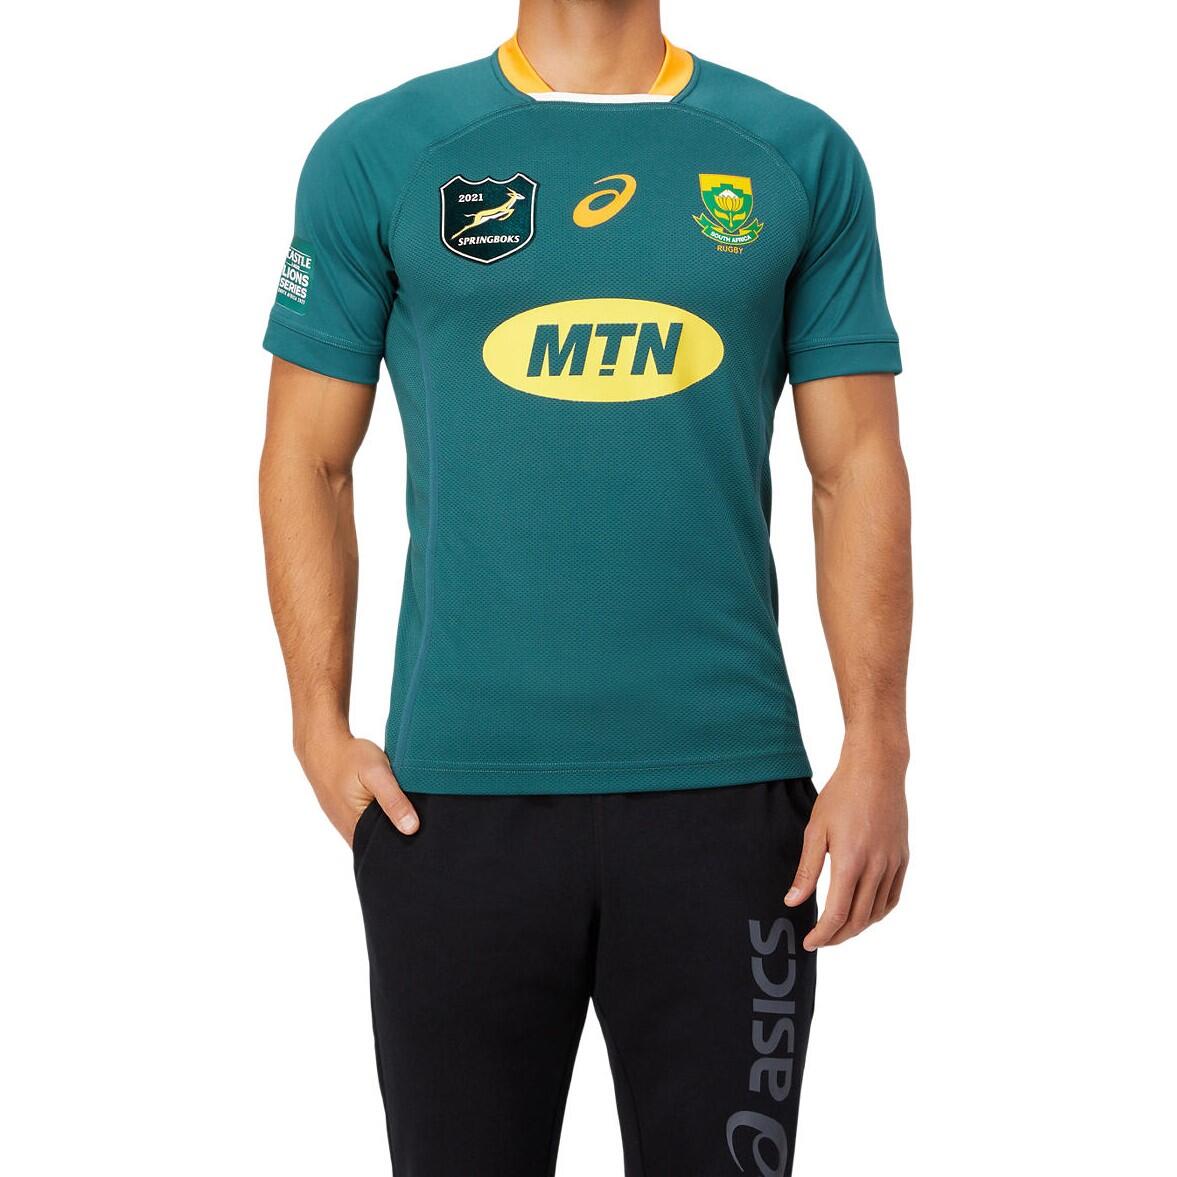 ASICS ASICS South Africa Springboks Mens Gameday Lions Rugby Shirt